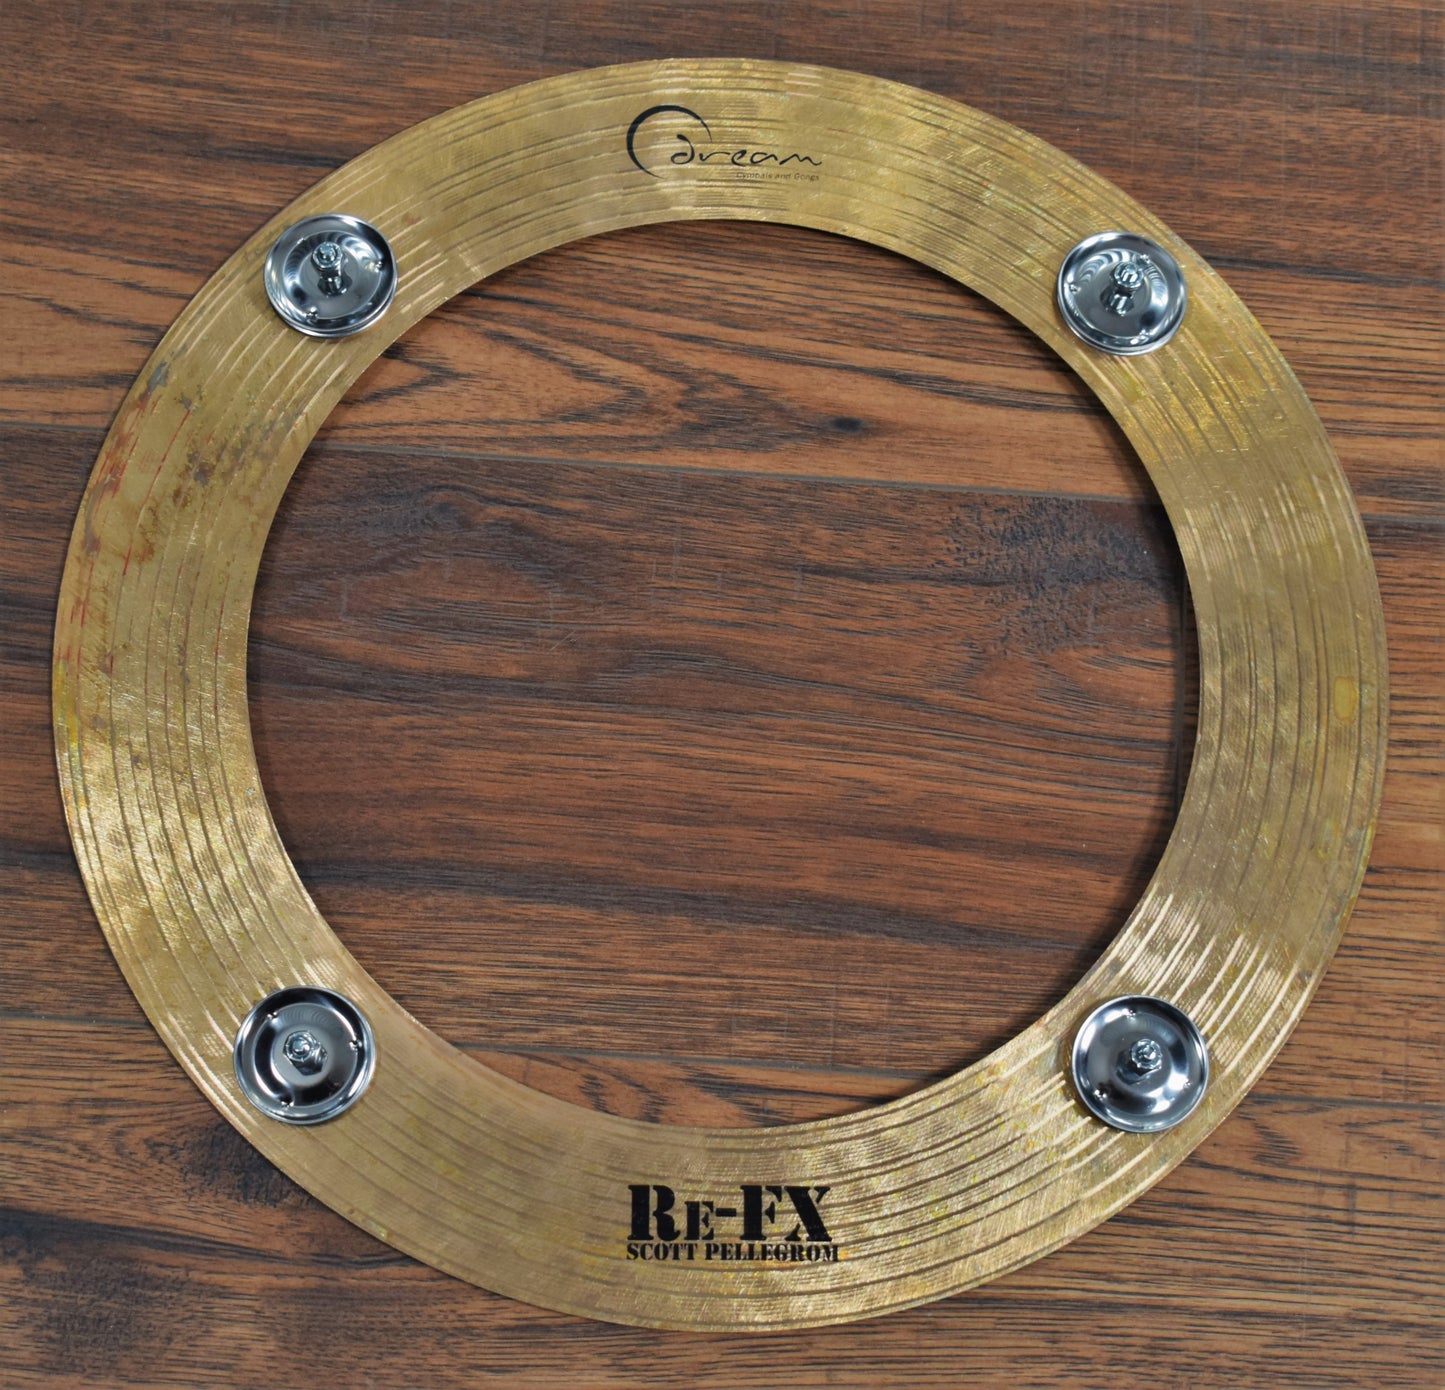 Dream Cymbals REFX-CC14 Recycled RE-FX Series Scott Pellegrom 14" Crop Circle with Jingles